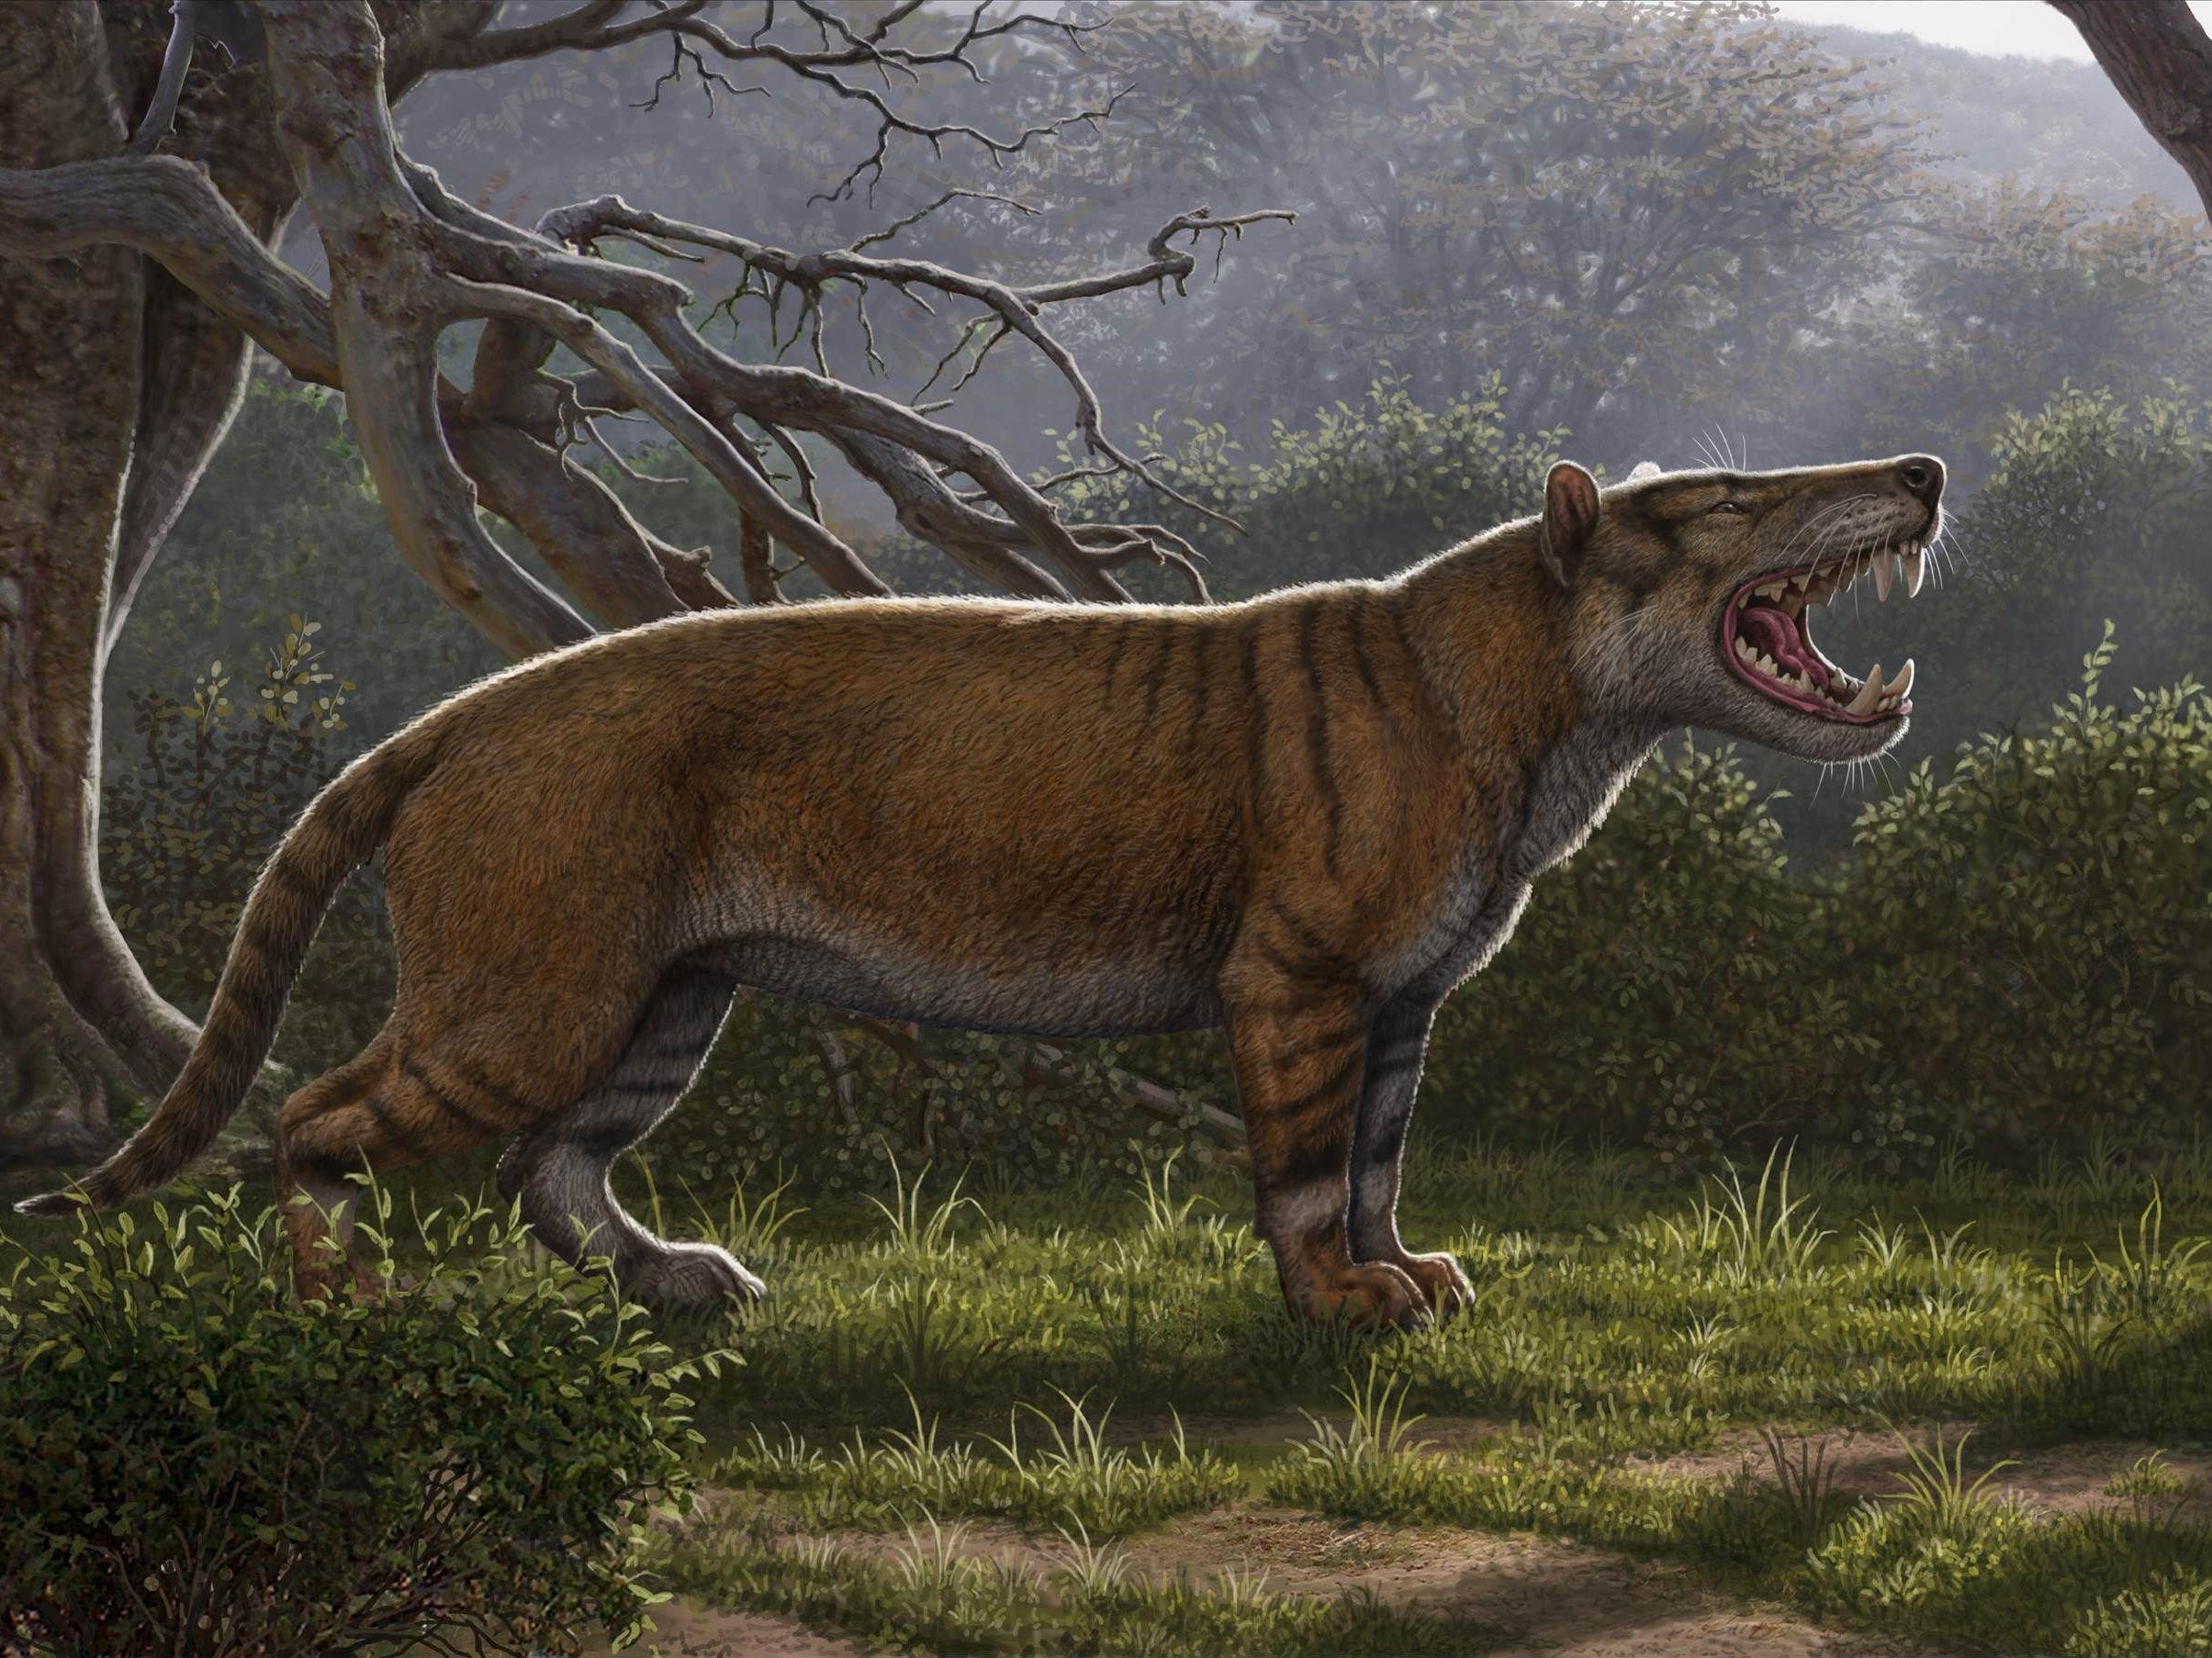 An artists impression of the Simbakubwa kutokaafrika, a gigantic carnivore which lived 22 million years ago in Africa and was larger than a polar bear